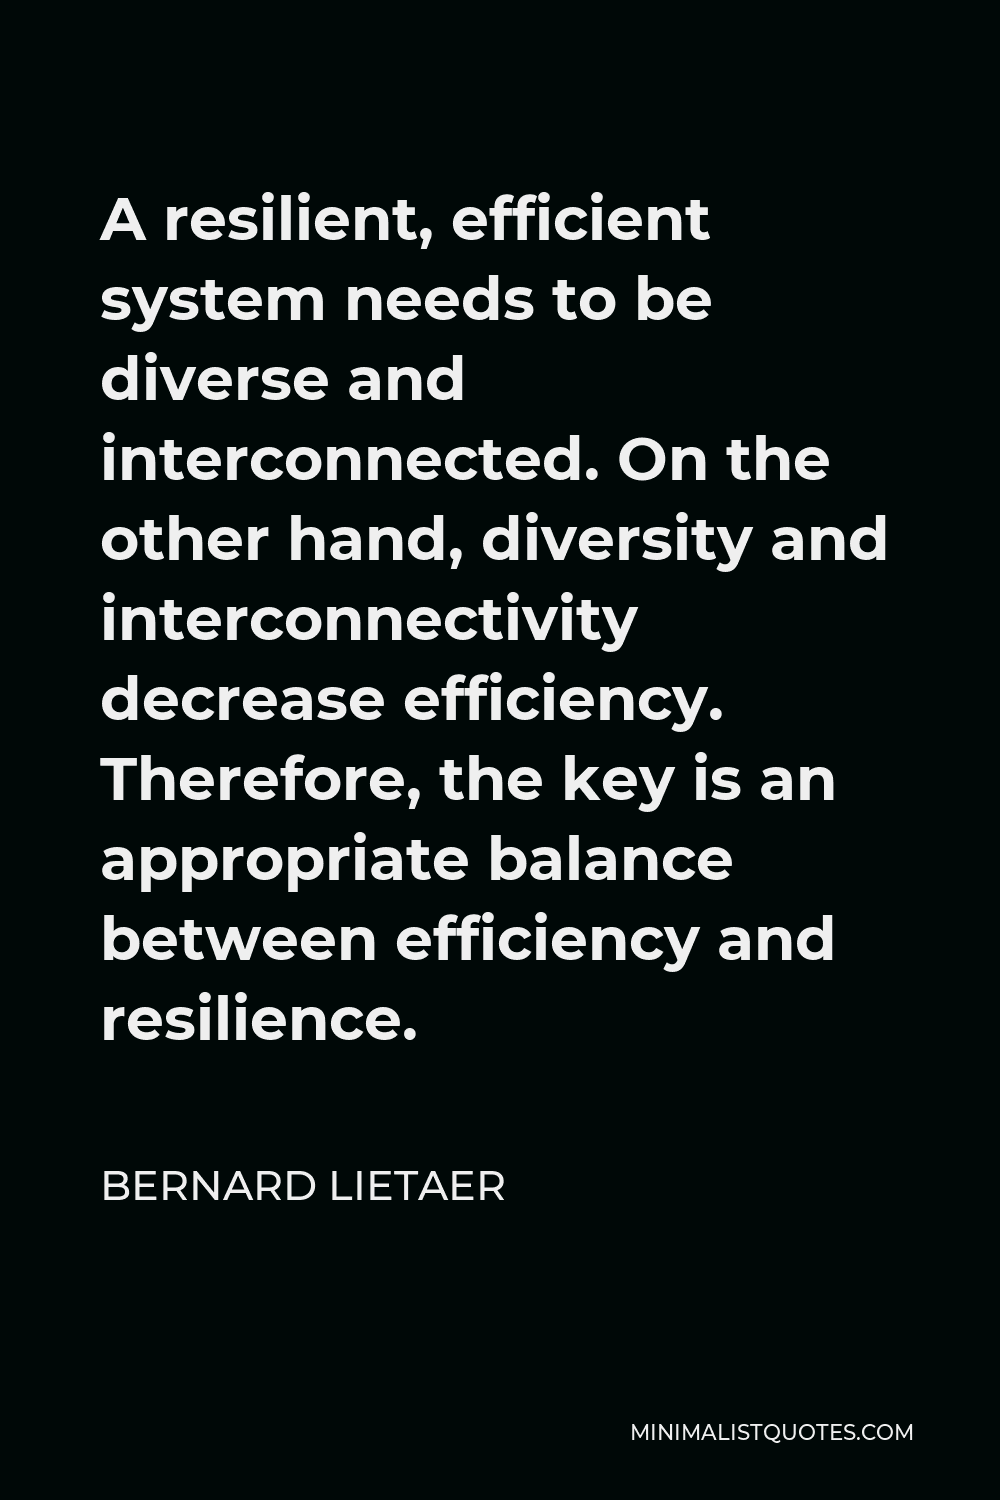 Bernard Lietaer Quote - A resilient, efficient system needs to be diverse and interconnected. On the other hand, diversity and interconnectivity decrease efficiency. Therefore, the key is an appropriate balance between efficiency and resilience.